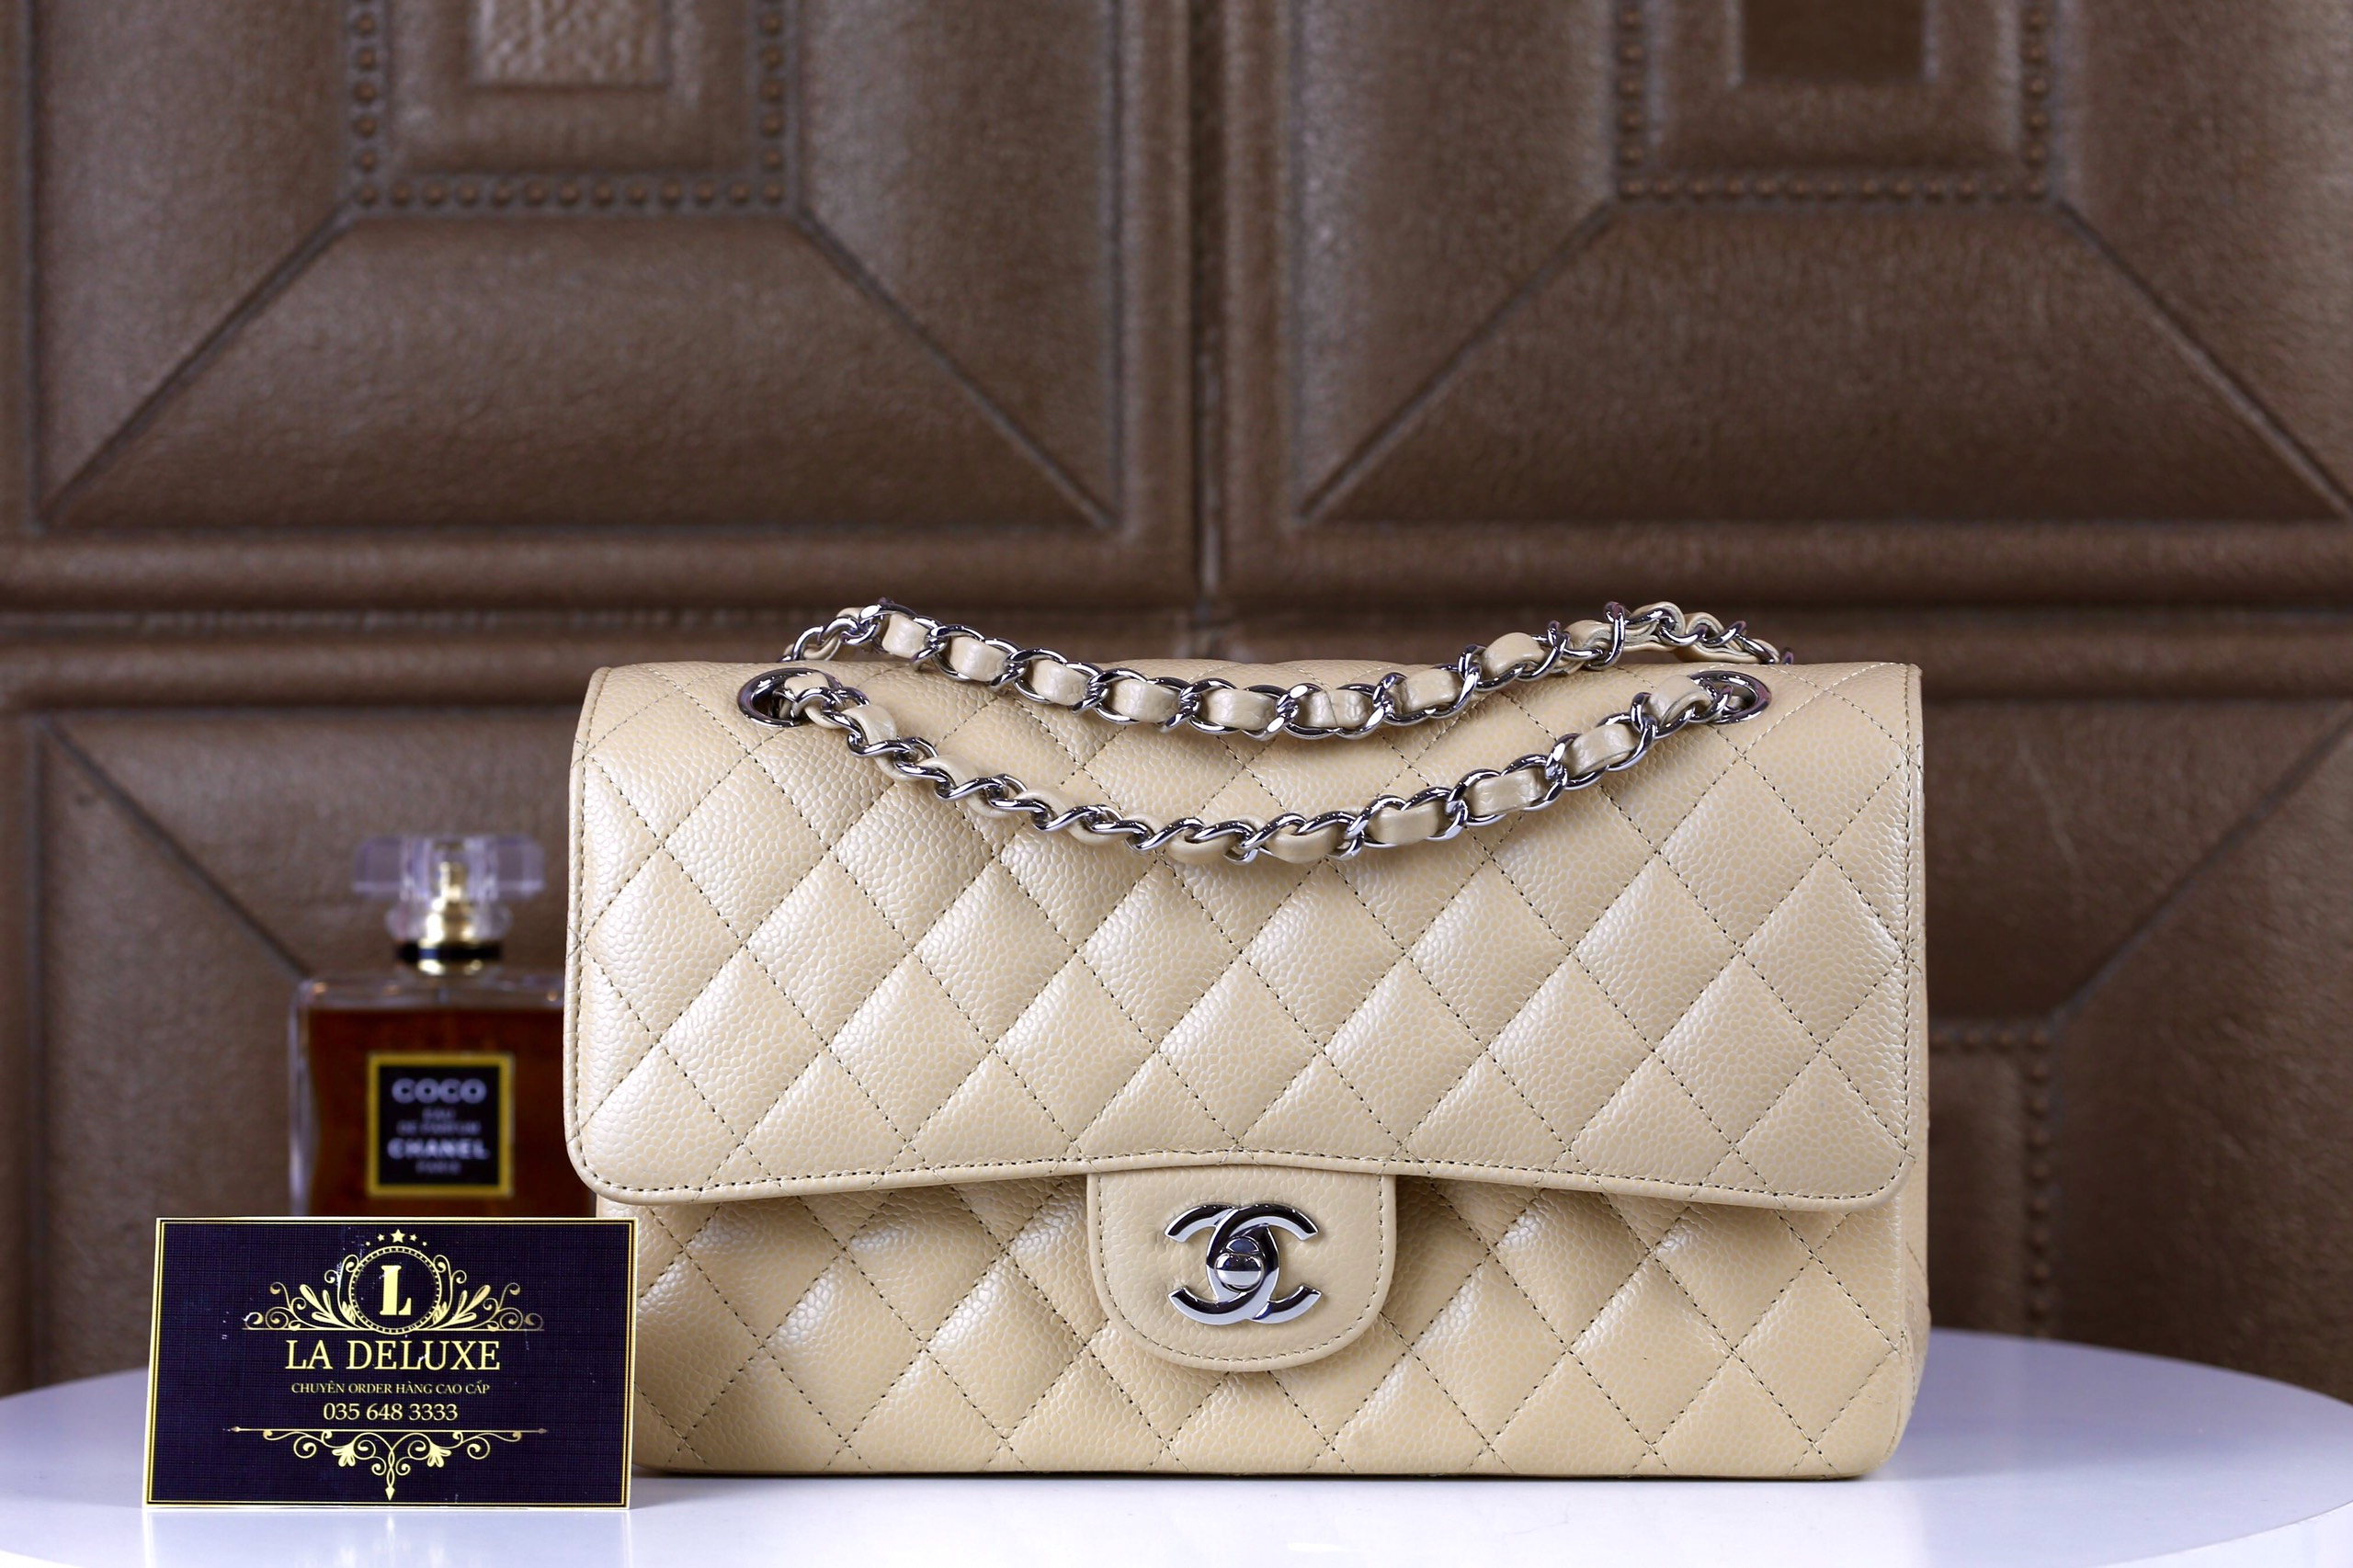 CHANEL CLASSIC FLAP BAG - Be/ Size  - La Deluxe